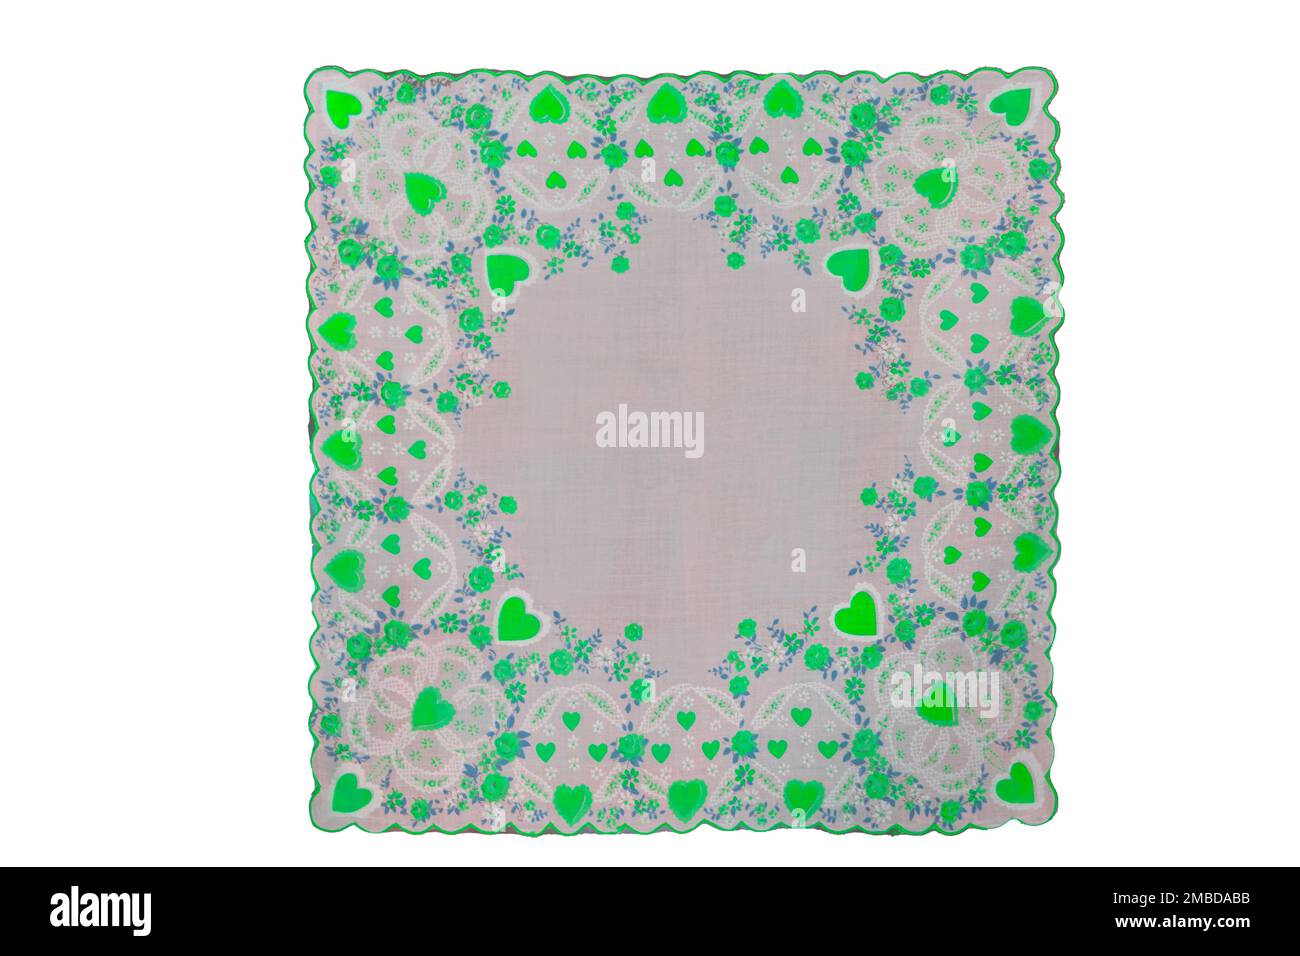 Isolated square green vintage hanky handkerchief for St Patricks Day or March or springtime. Hearts and flowers make scalloped border. Stock Photo